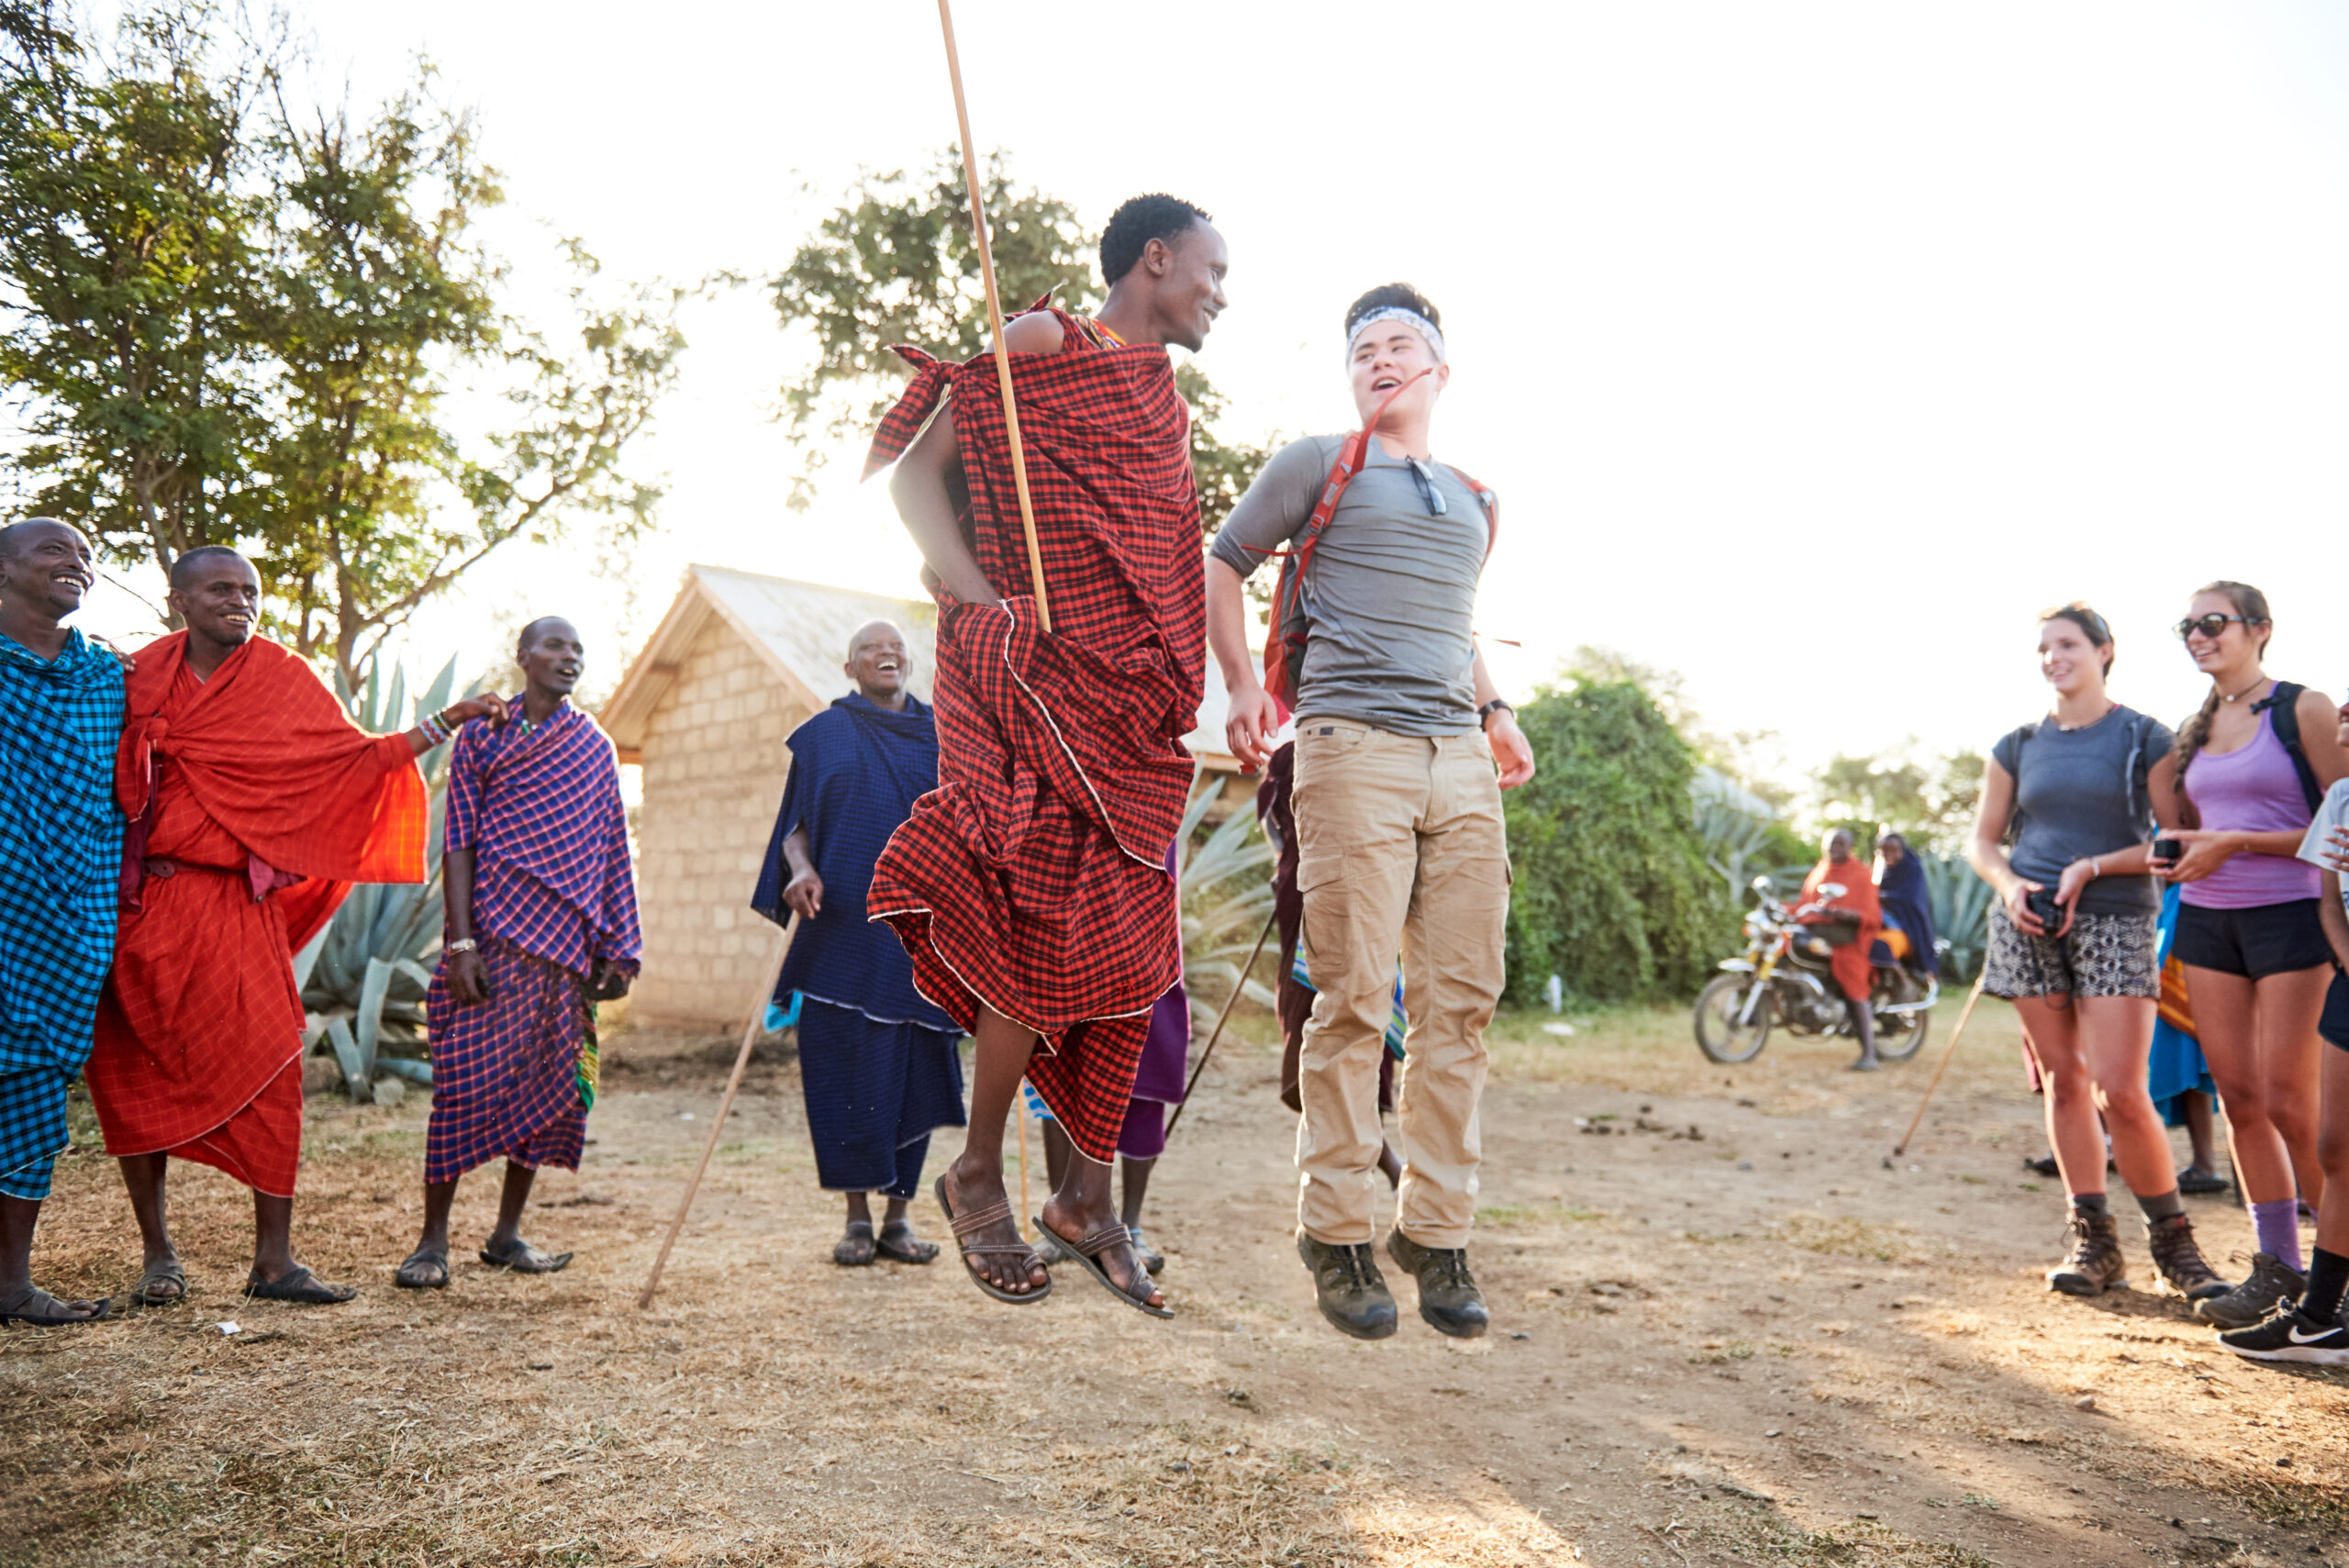 student jumps with Maasai man in a cultural visit